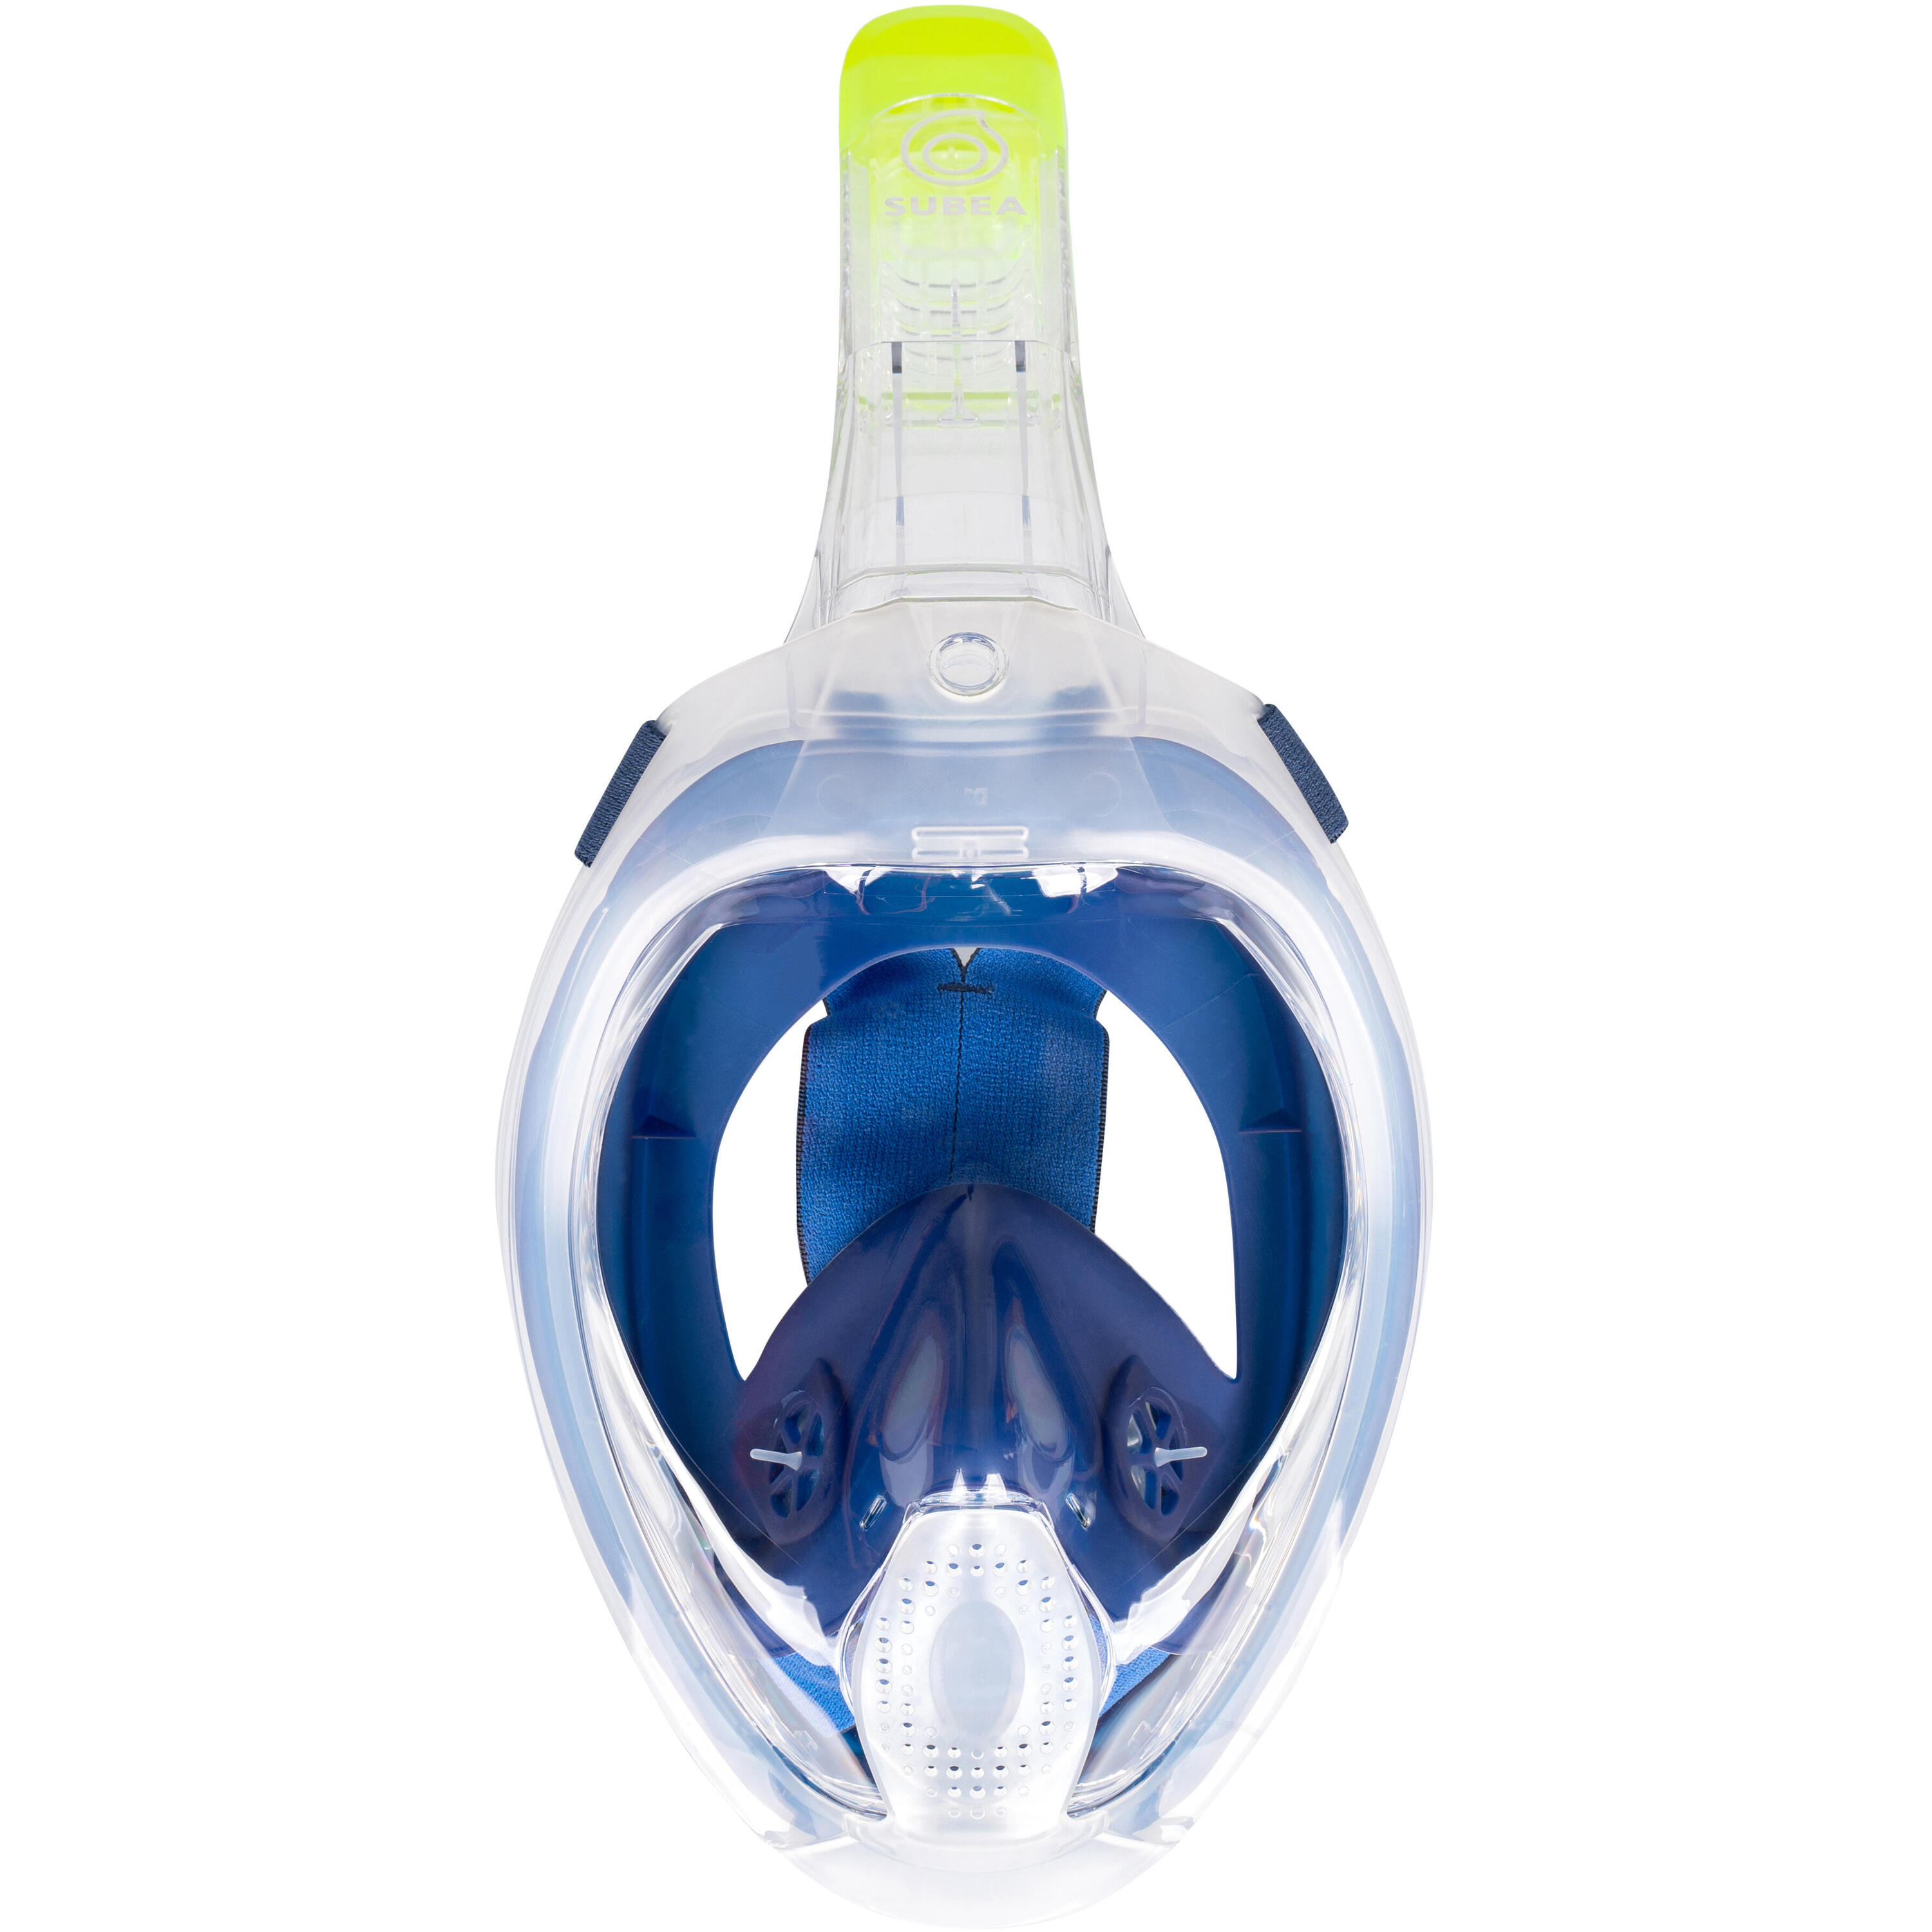 Adult’s Easybreath surface mask with an acoustic valve - 540 freetalk blue 2/8